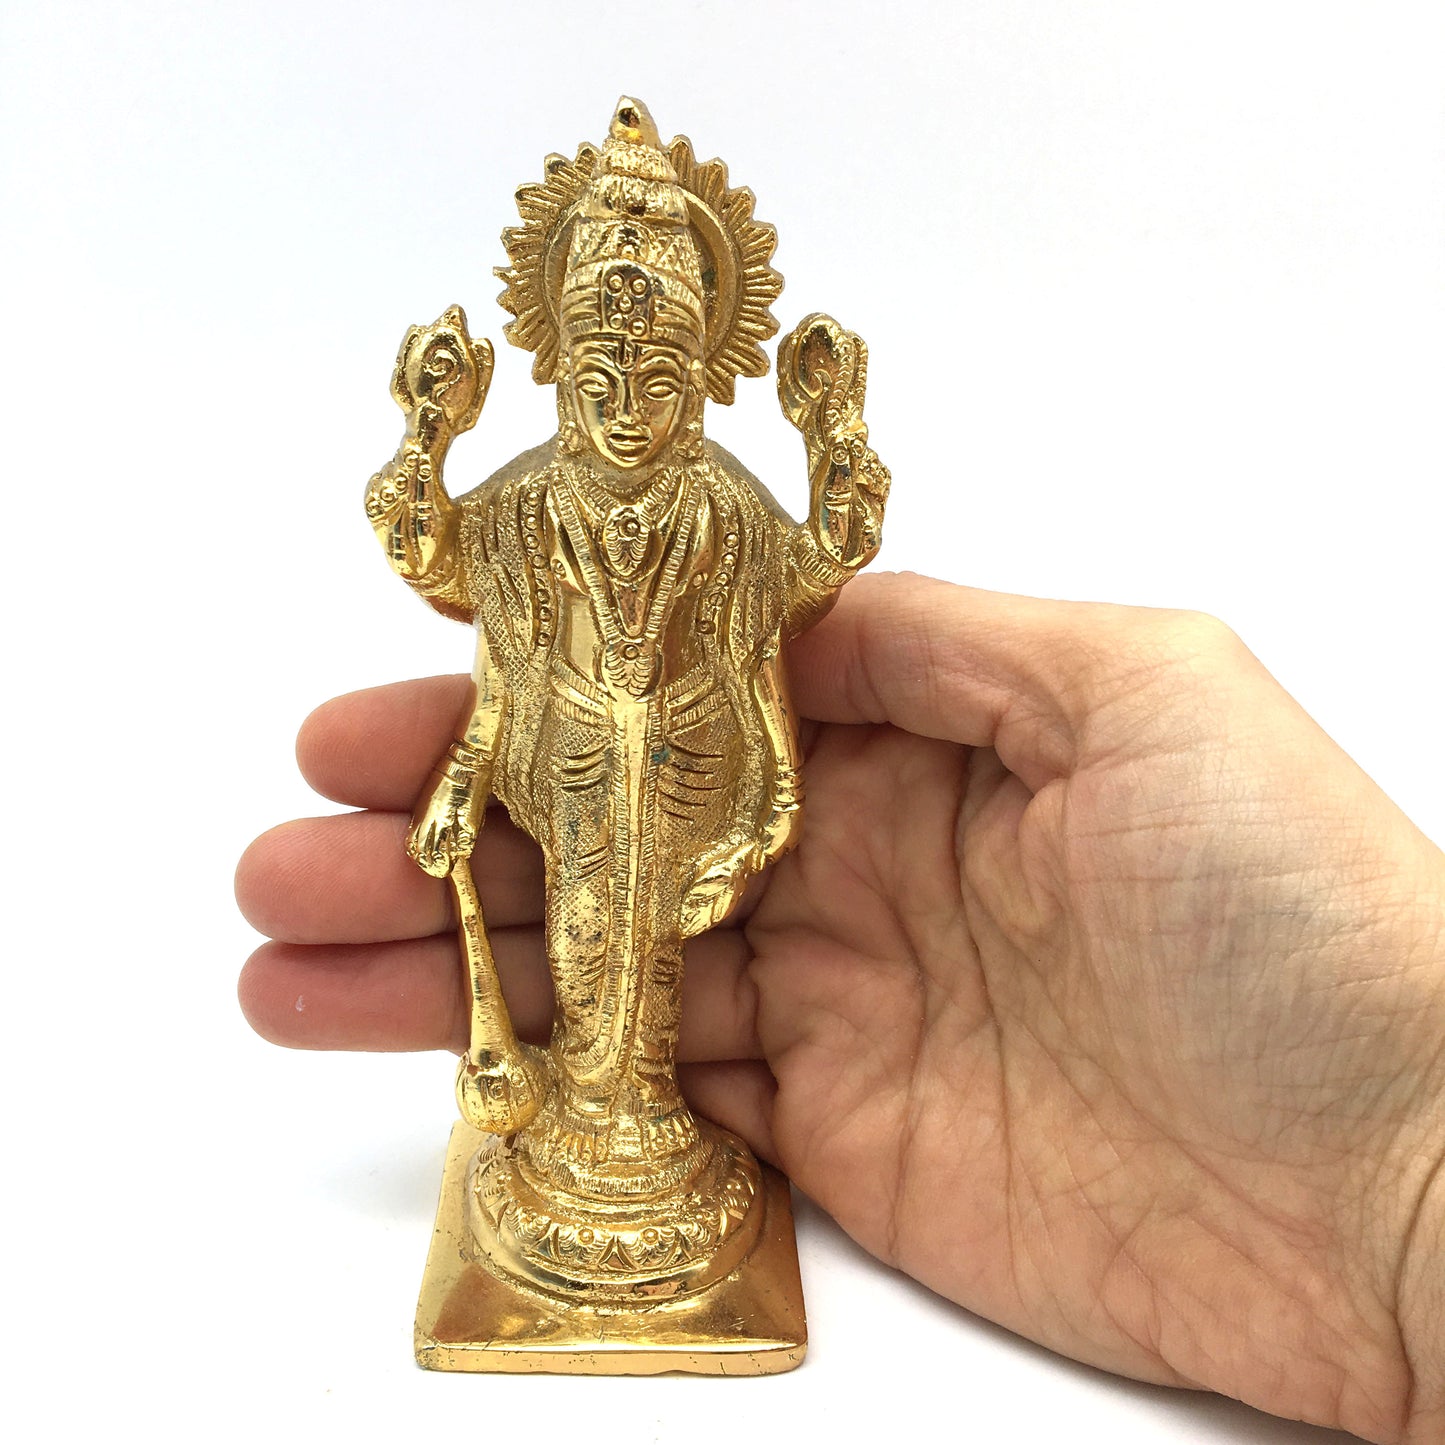 Gold-plated Brass India God Lord Vishnu Handcrafted Statue Sculpture 5.75"